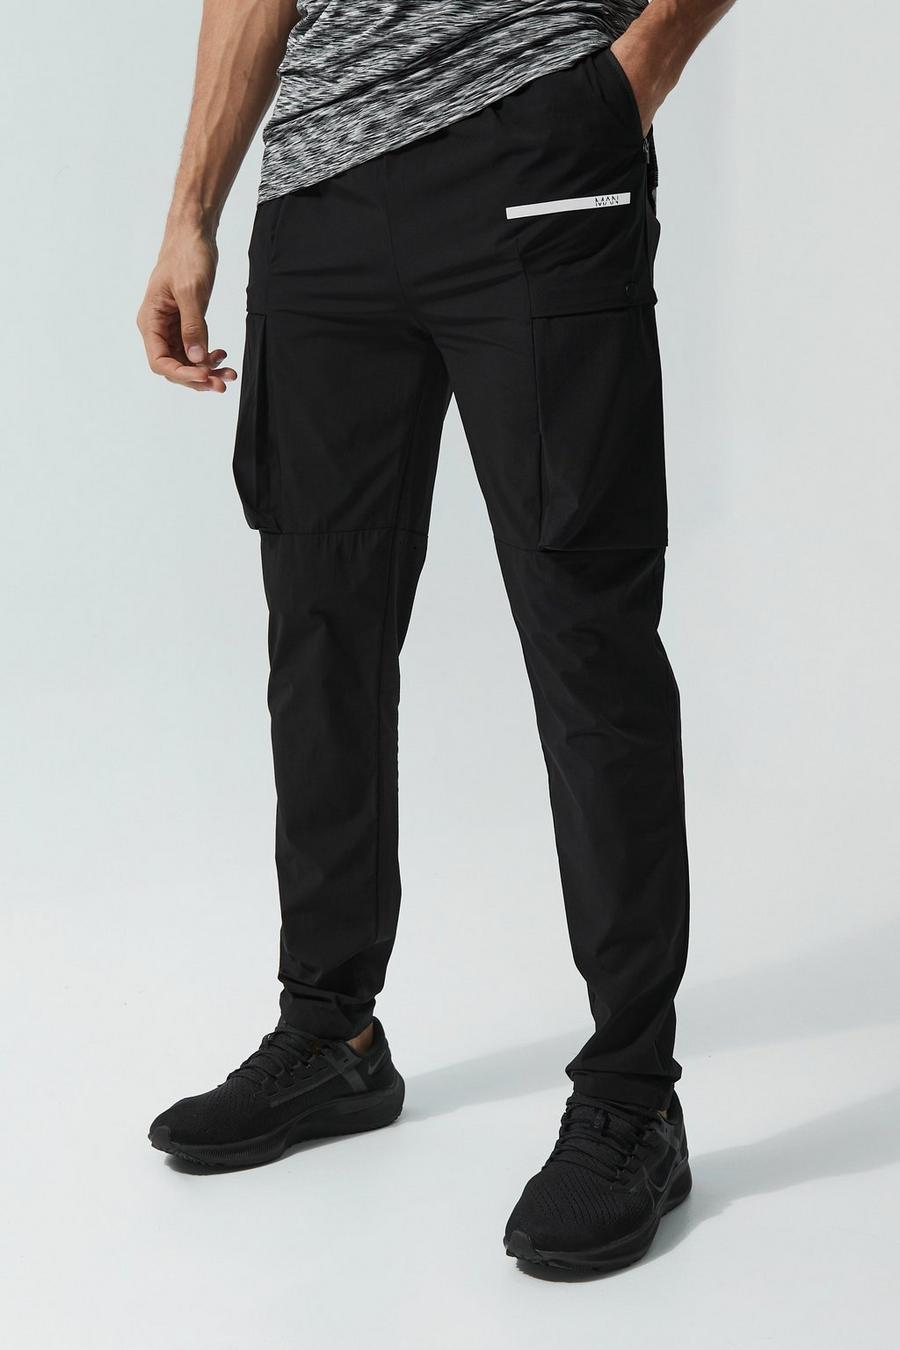 Black nero Tall Man Active Perforated Cargo Pants